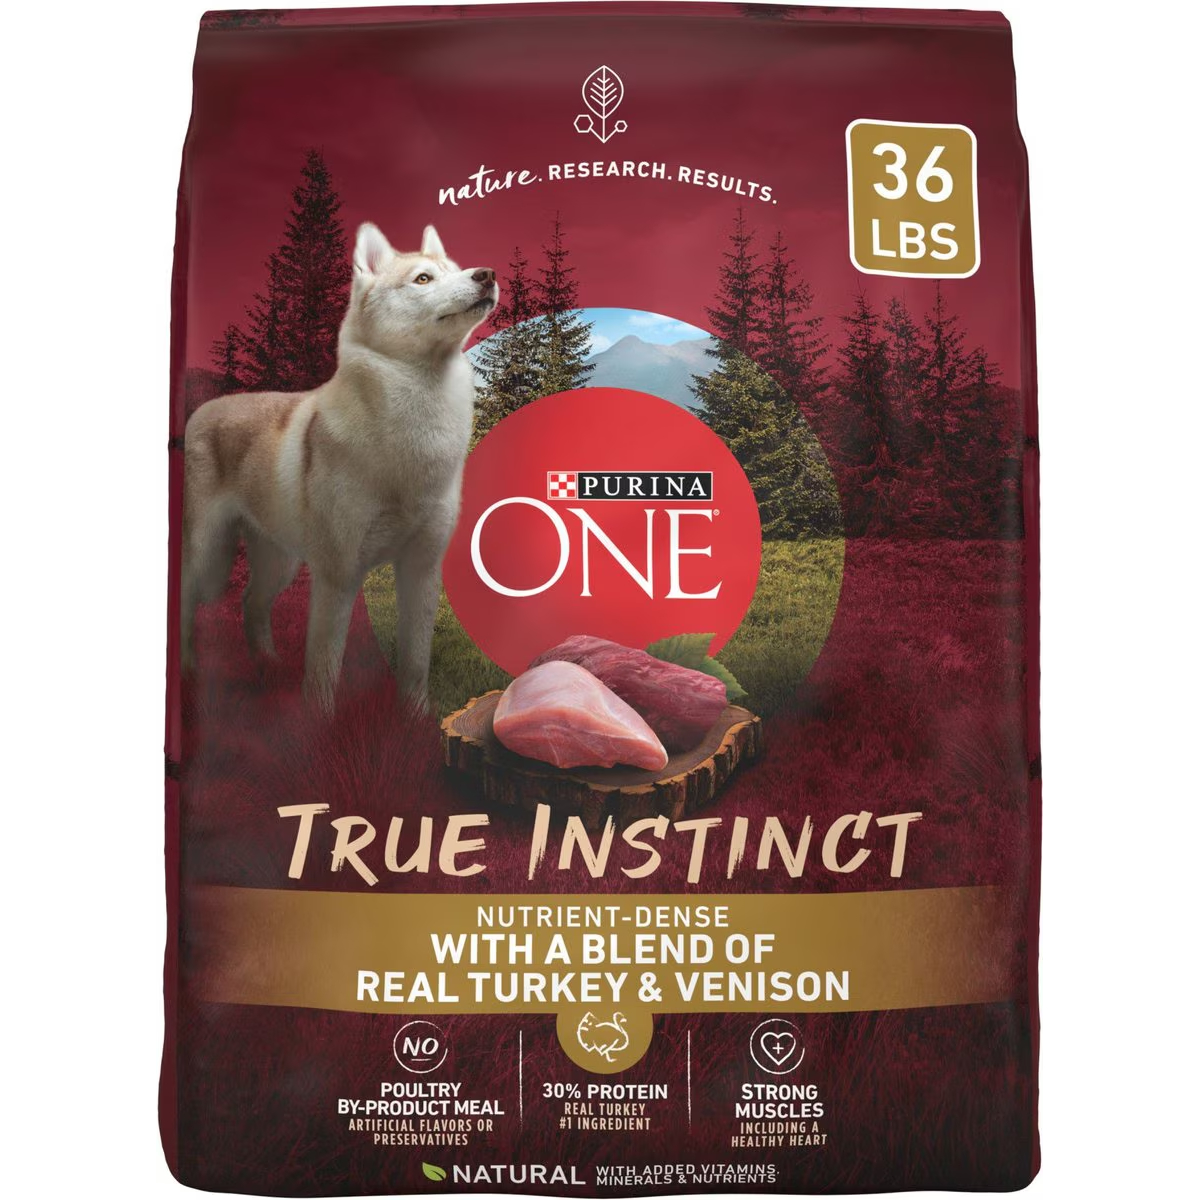 Purina ONE True Instinct Natural High Protein with Real Turkey & Venison Dry Dog Food